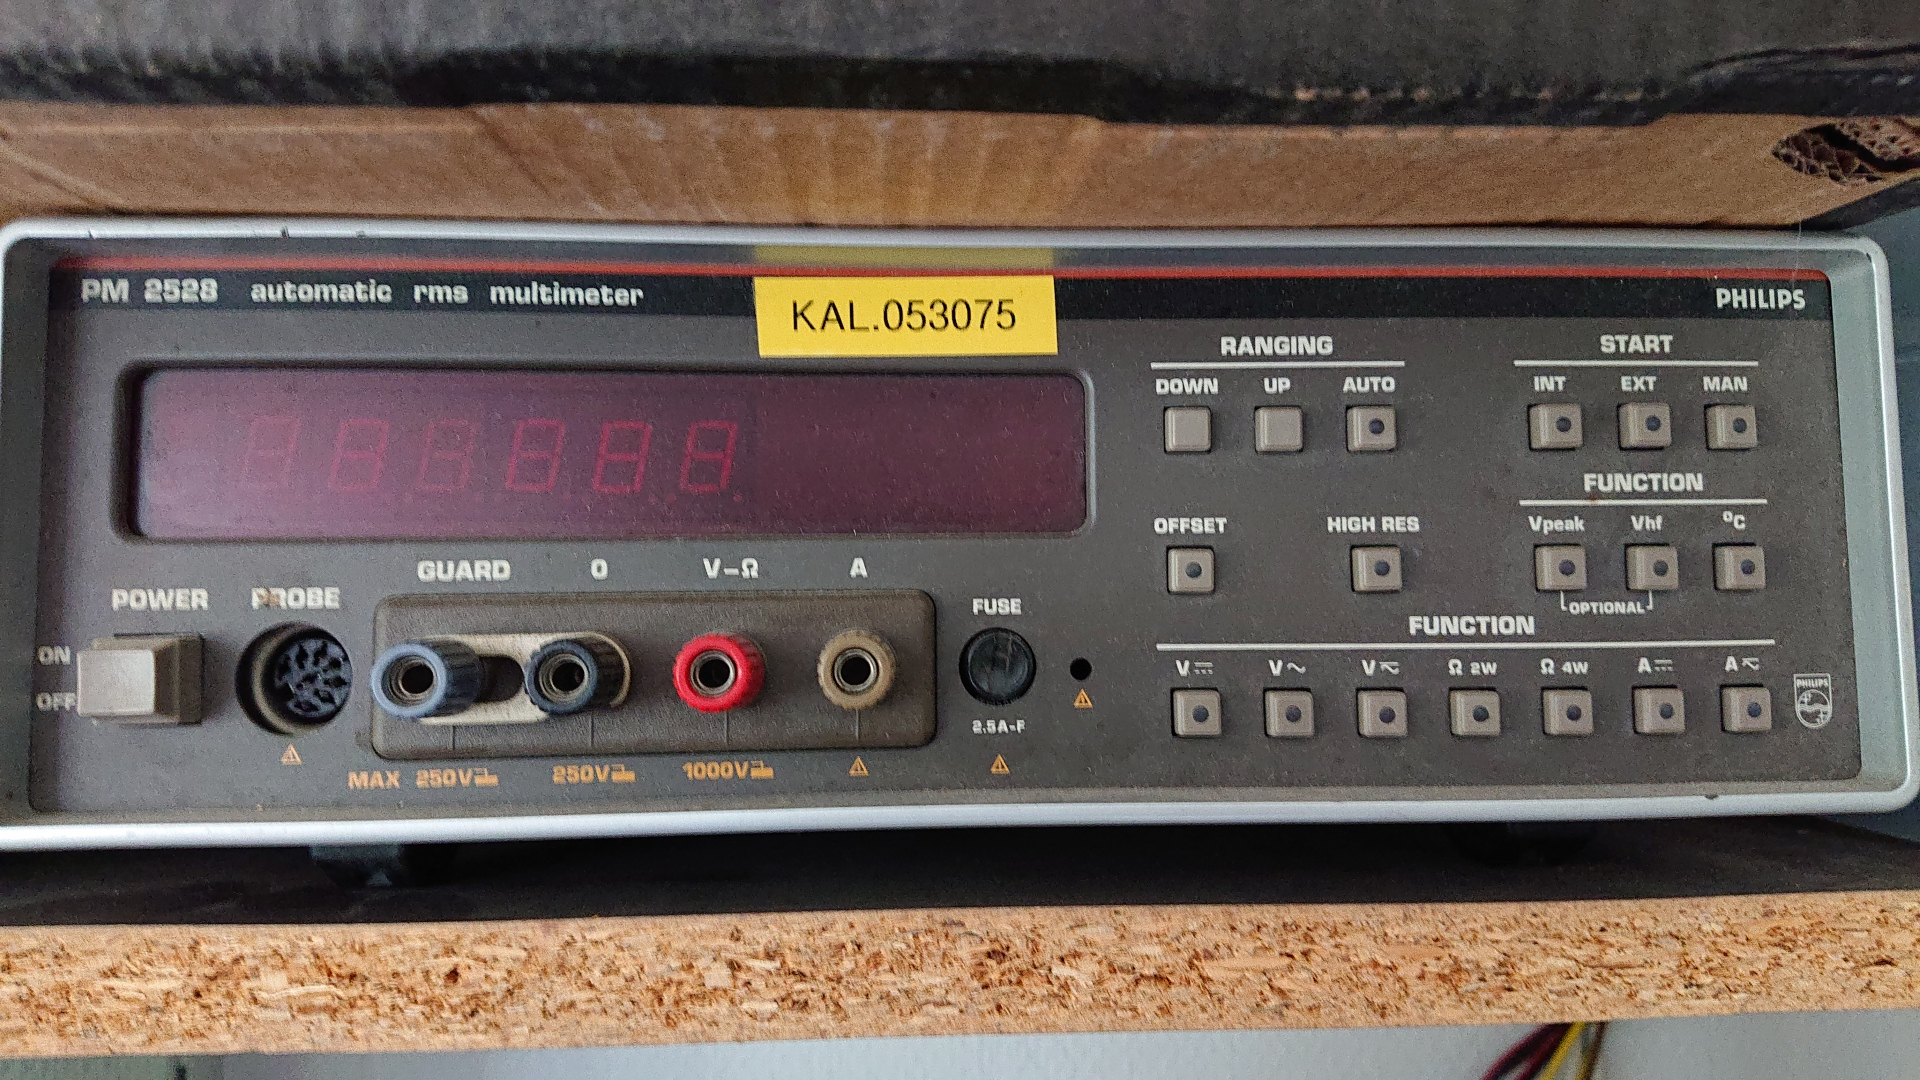 File:RMS-multimeter_Picture.png